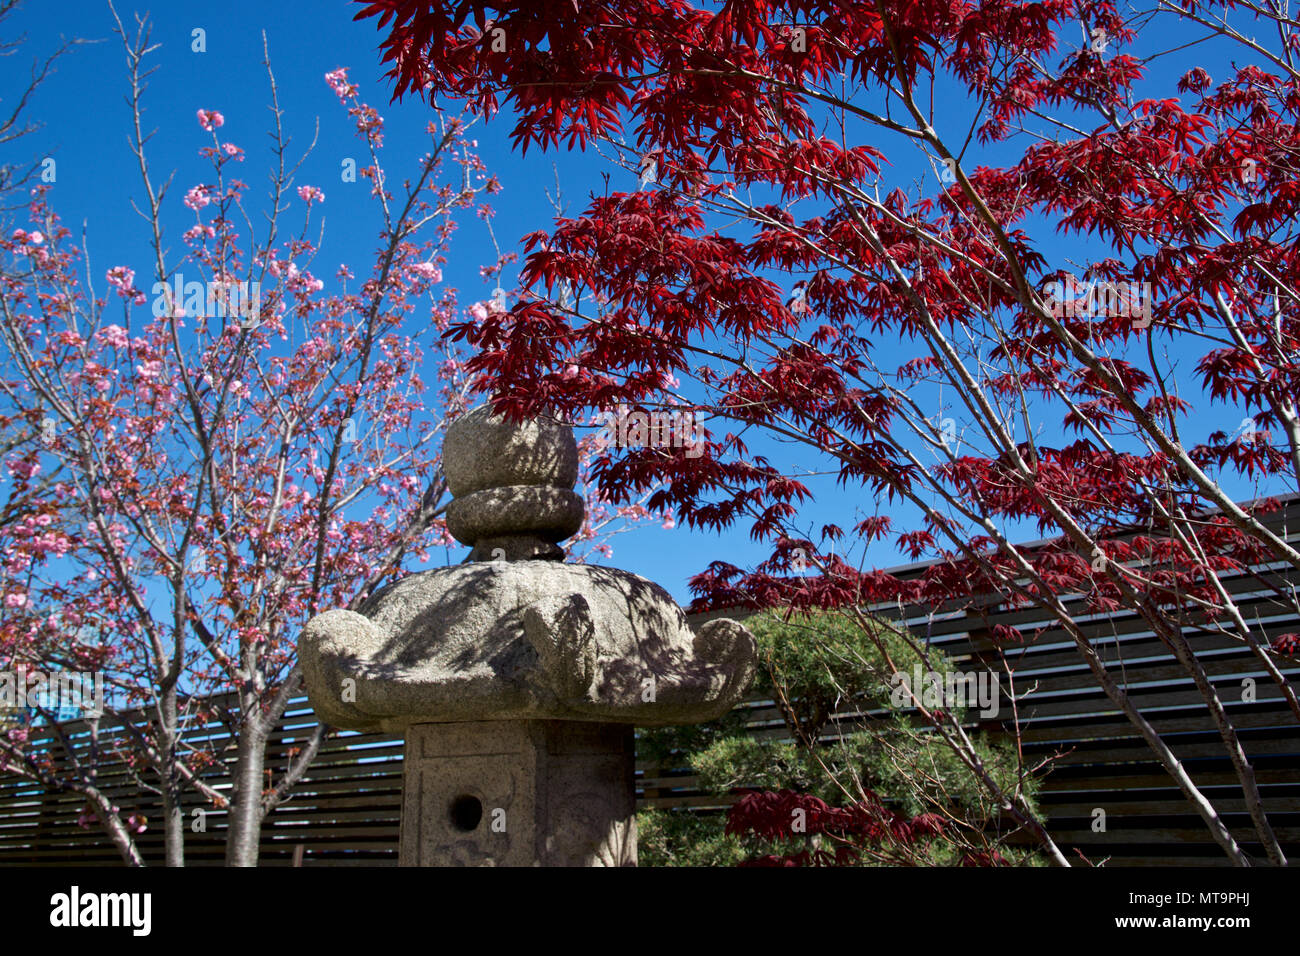 A beautiful Japanese maple tree and pink cherry flowers in the Japanese garden setting Stock Photo